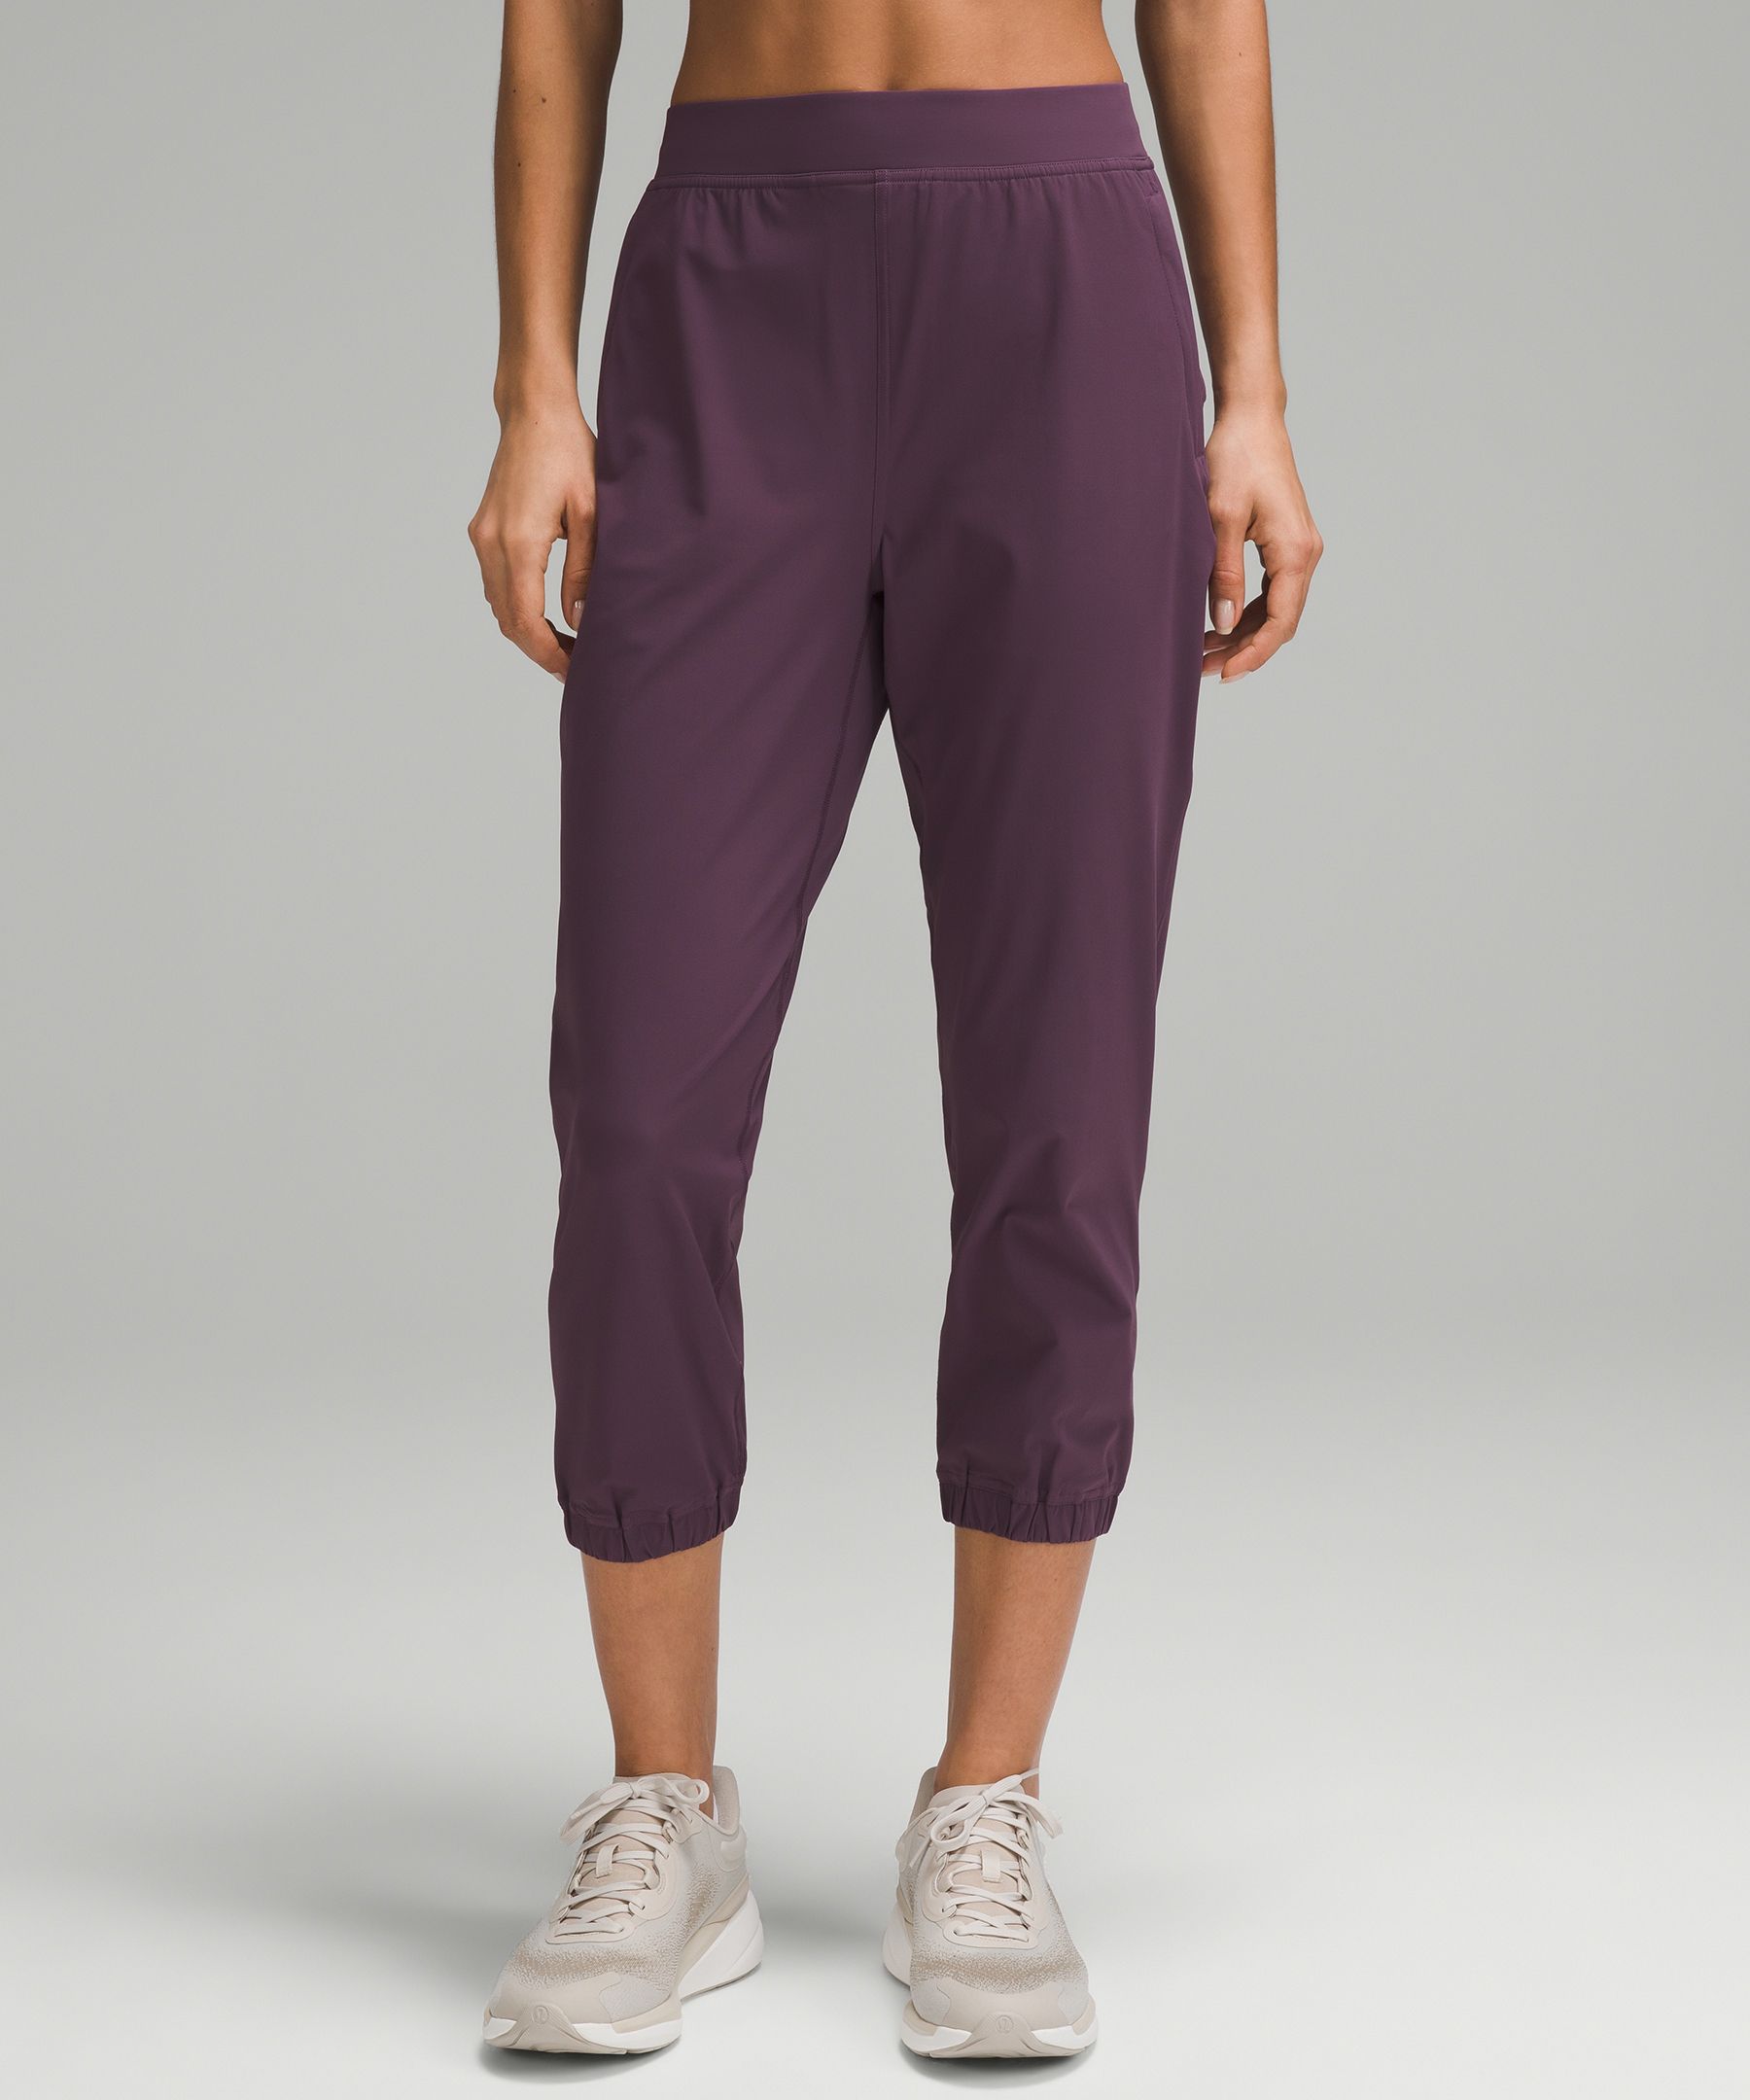 Lululemon Ready To Fleece Joggers Black Size 8 - $25 (76% Off Retail) -  From Jessica